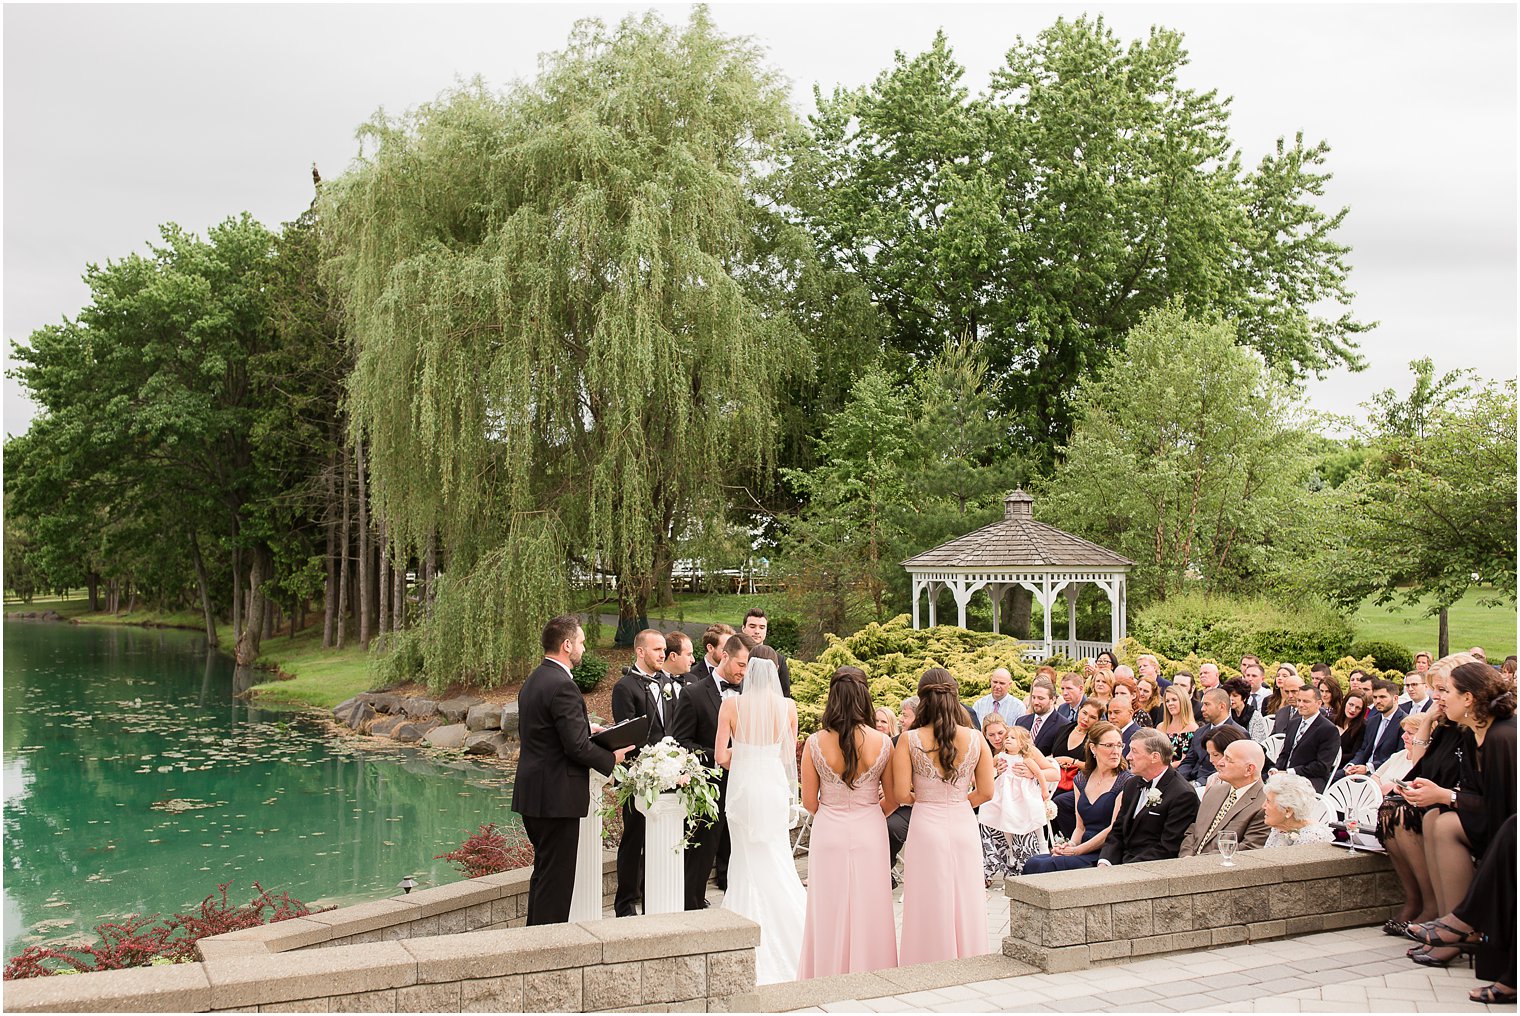 Outdoor ceremony photo | Wedding at Windows on the Water at Frogbridge